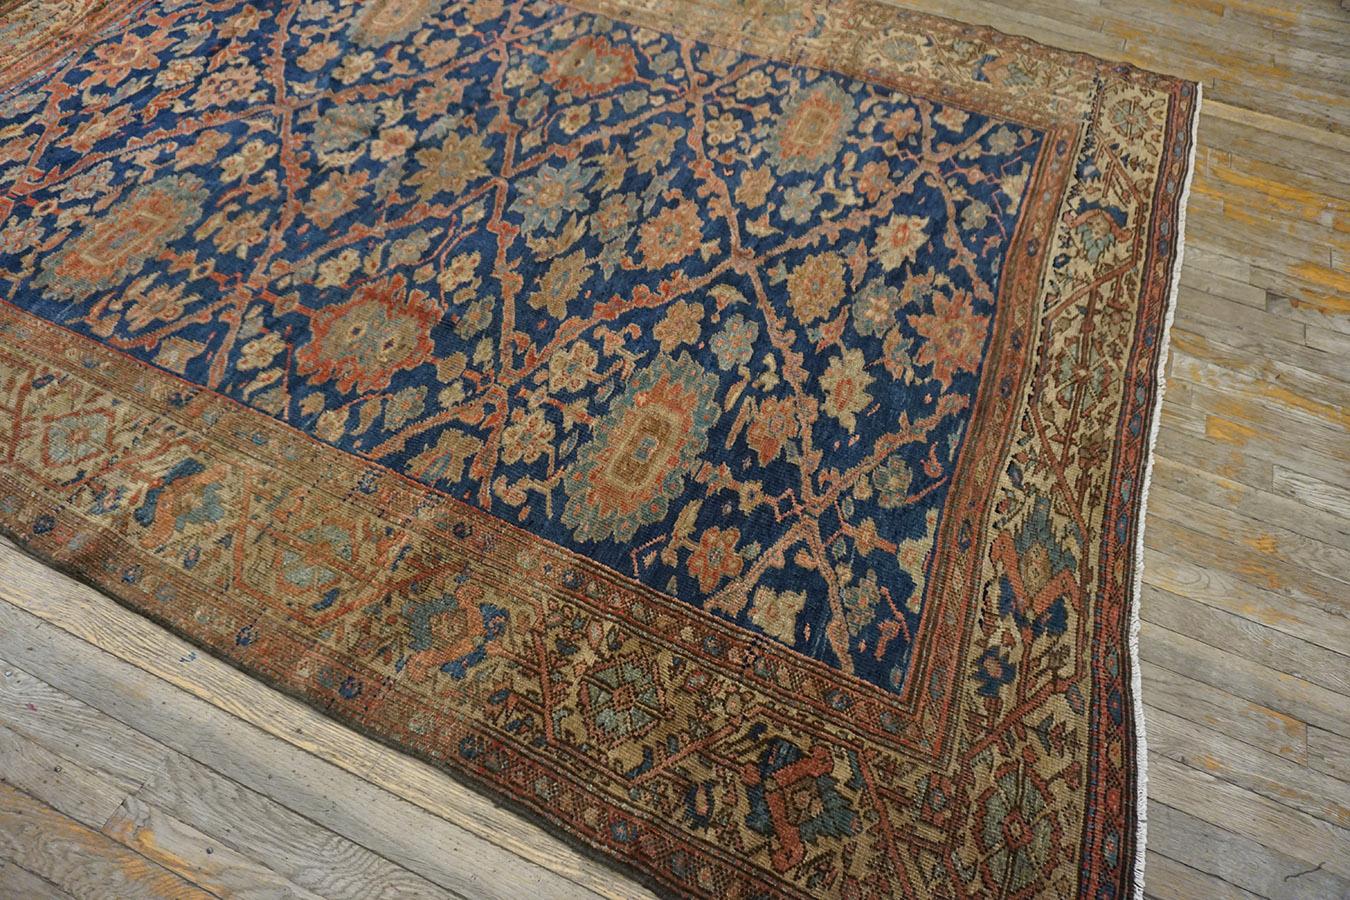 Late 19th Century Persian Sultanabad Carpet ( 6'2